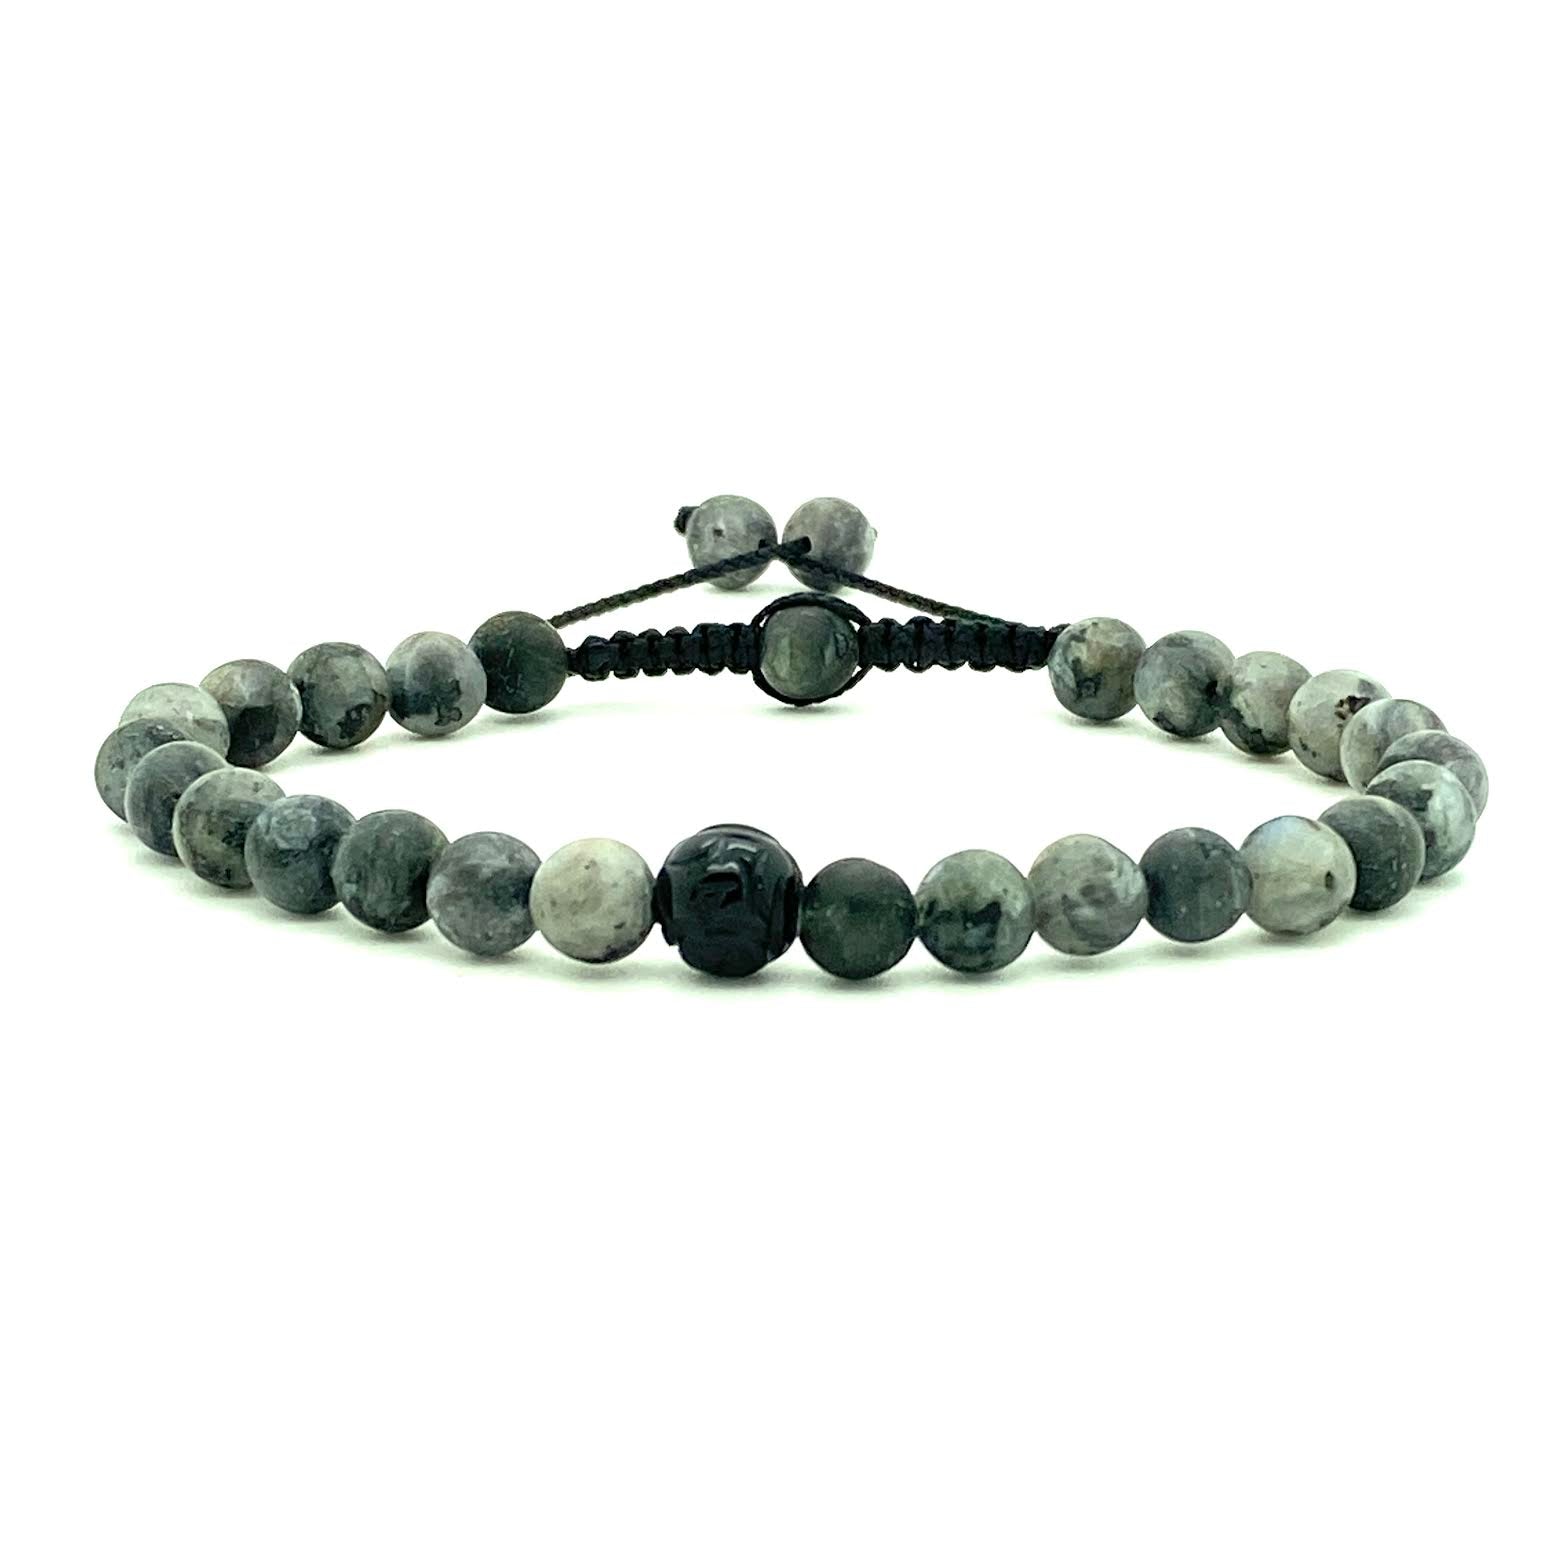 Labradorite beads act to stimulate intuition and to enhance protective energy. These matte Labradorite beads are accented with a single black dragon onyx bead. Hand knotted adjustable cord for a perfect fit. Made by WristBend